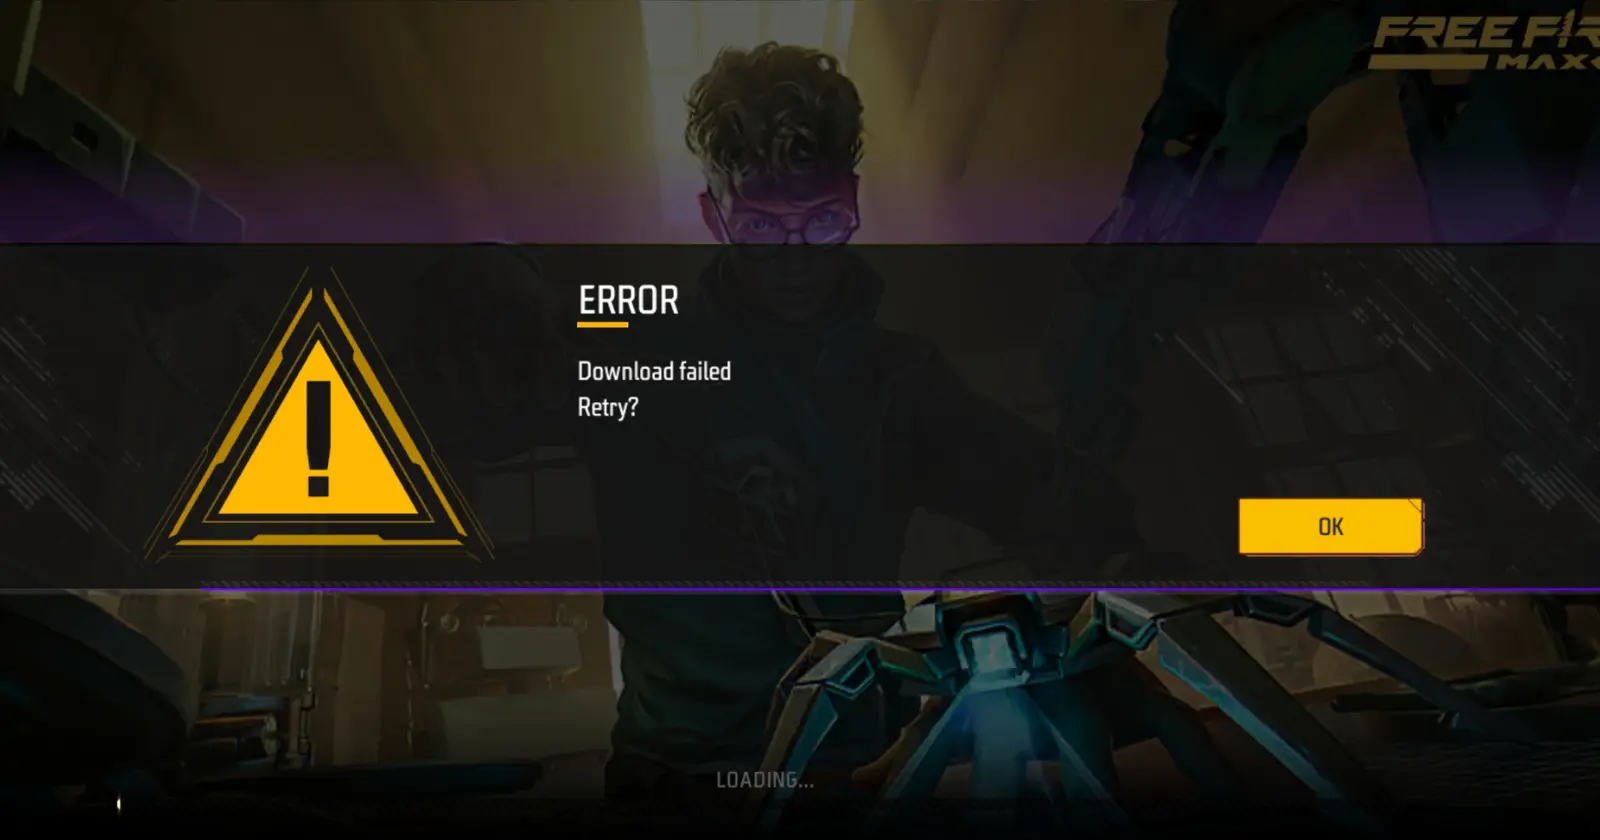 Free Fire MAX loading screen: download fail prompt with retry option.